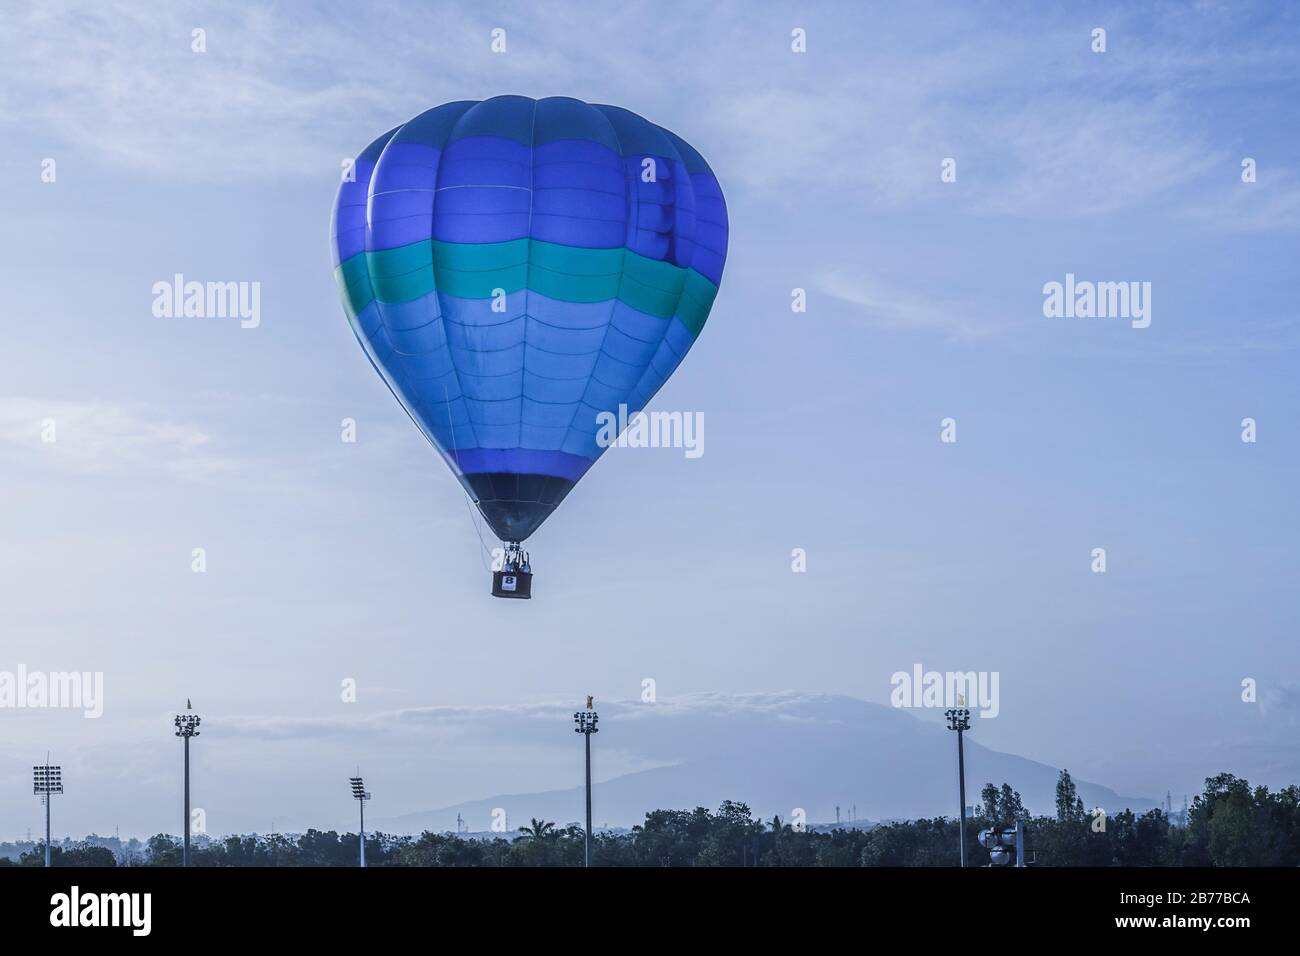 A hot air balloon festival features paragliders, hot air balloons and other forms of air transports. The hot air balloon launch being the main event. Stock Photo